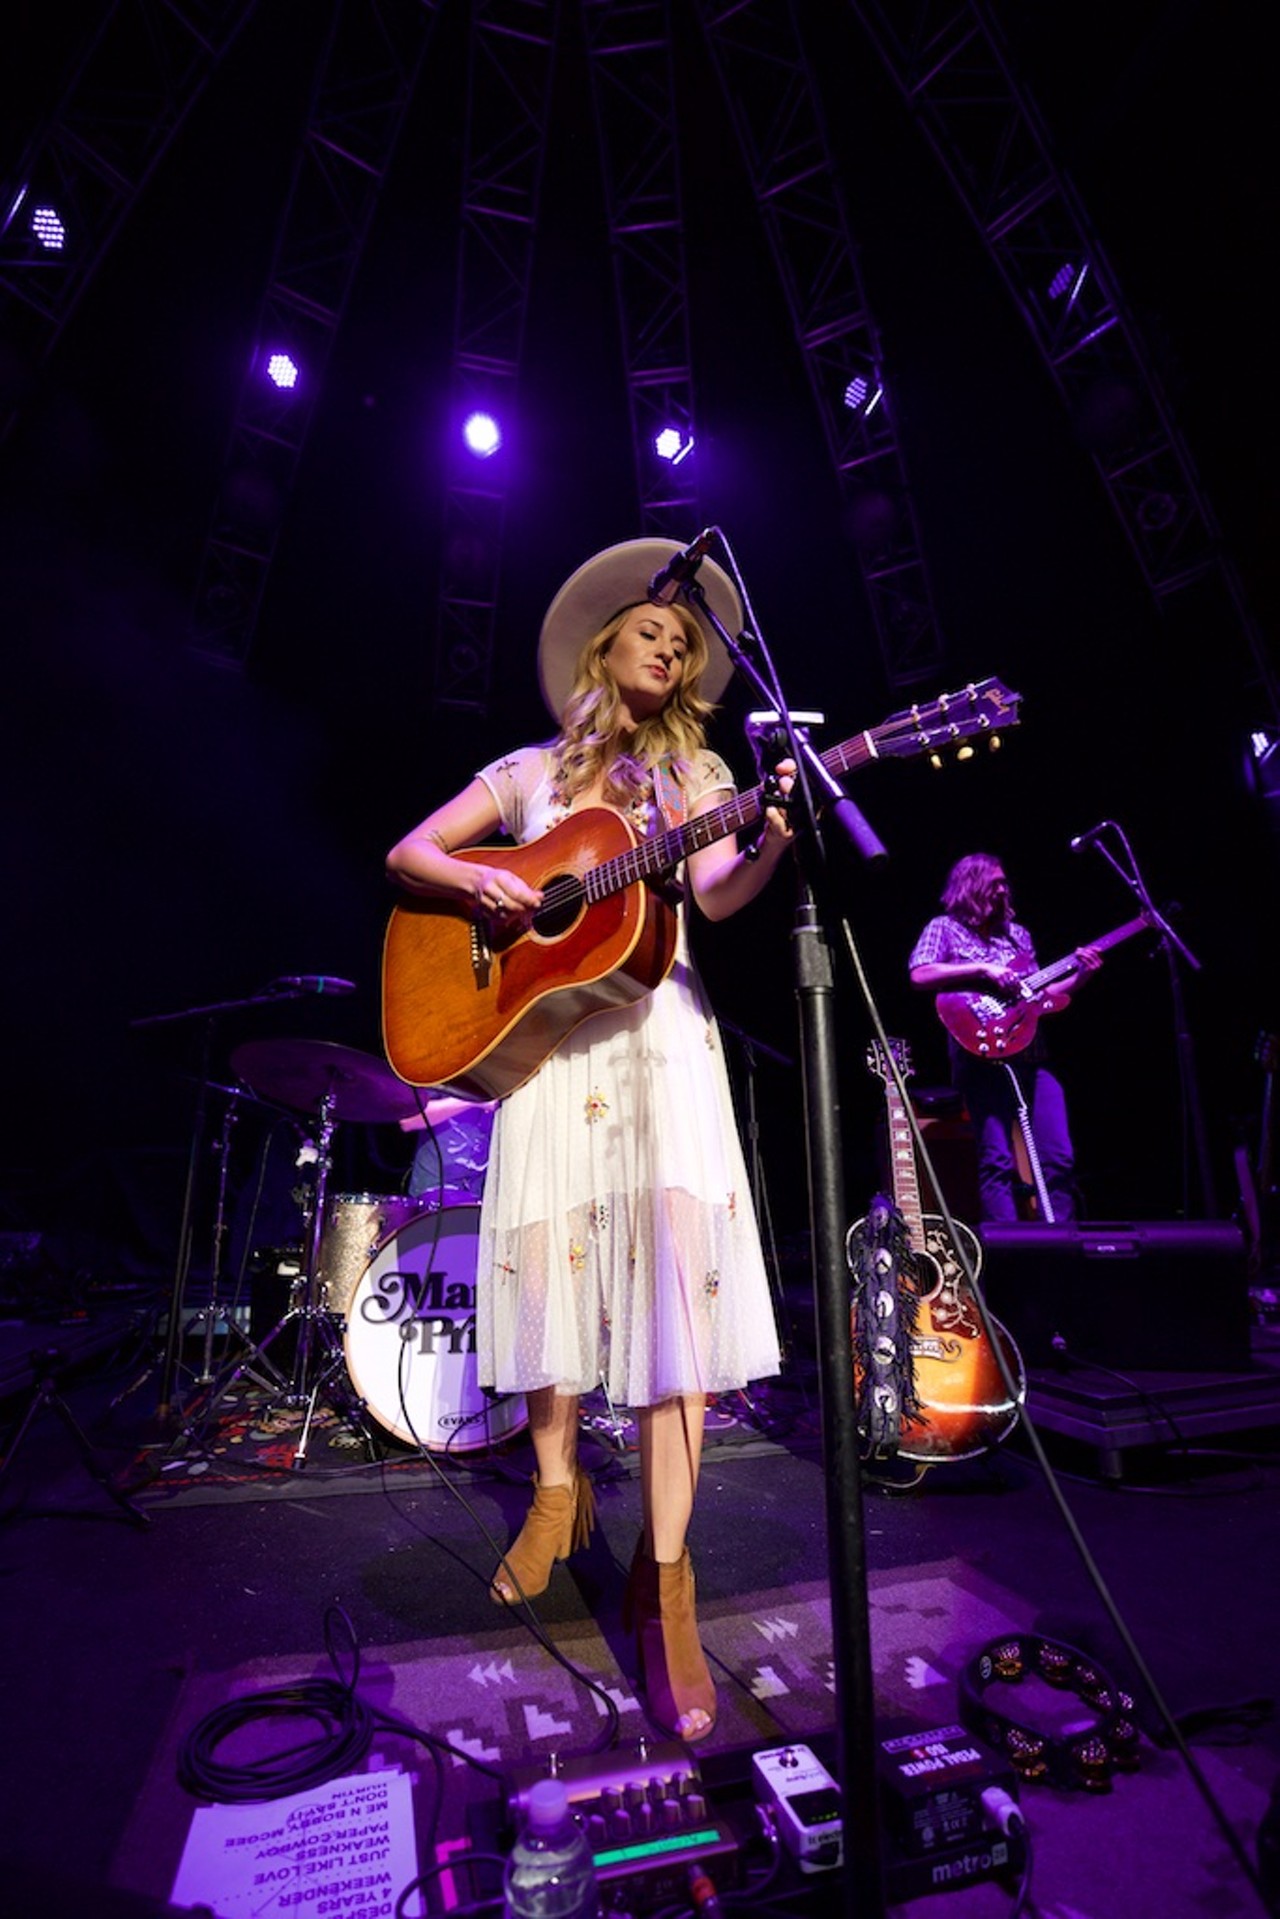 Photos of  Chris Stapleton, Margo Price and Brent Cobb Performing at Blossom